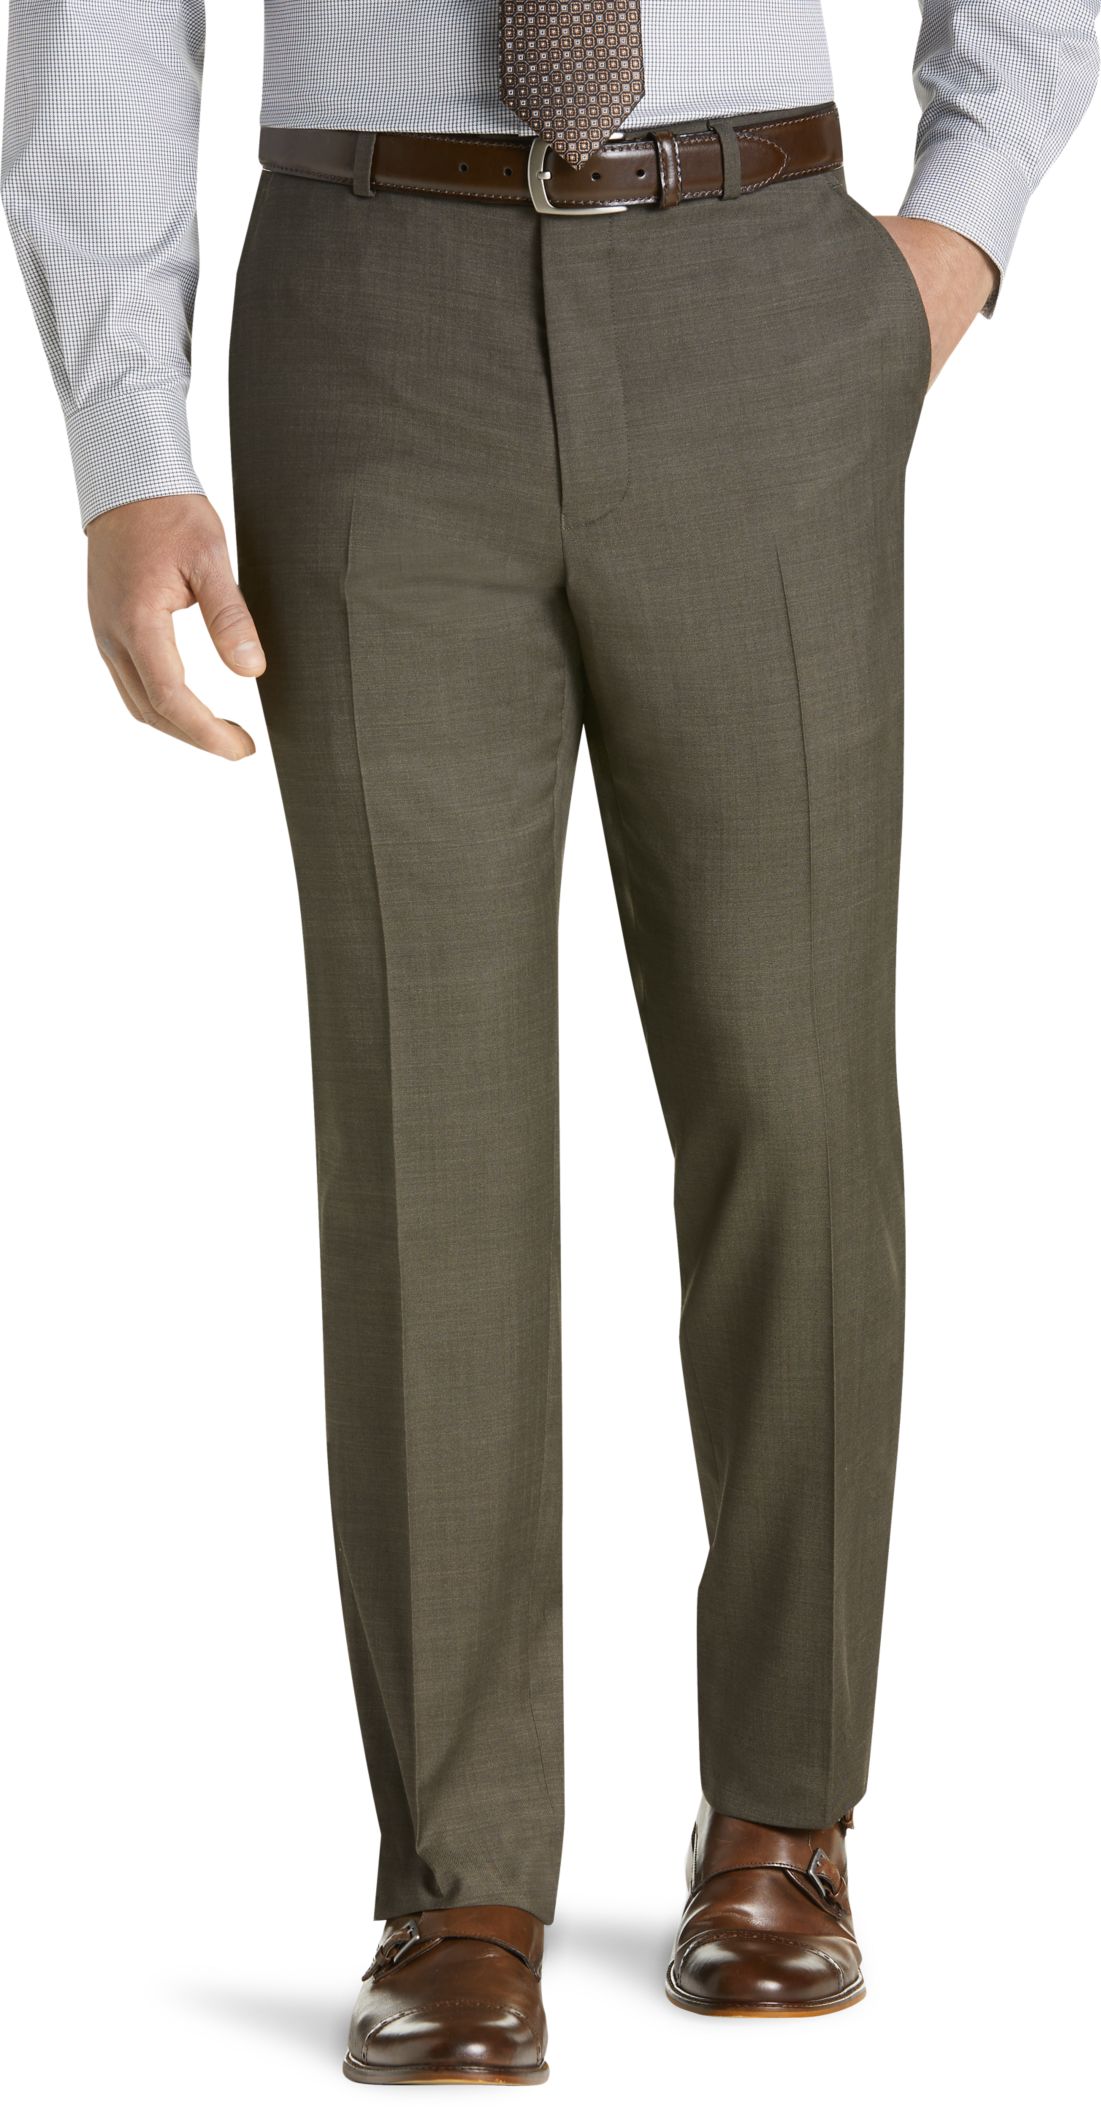 Checked Flat-Front Trousers with Insert Pockets